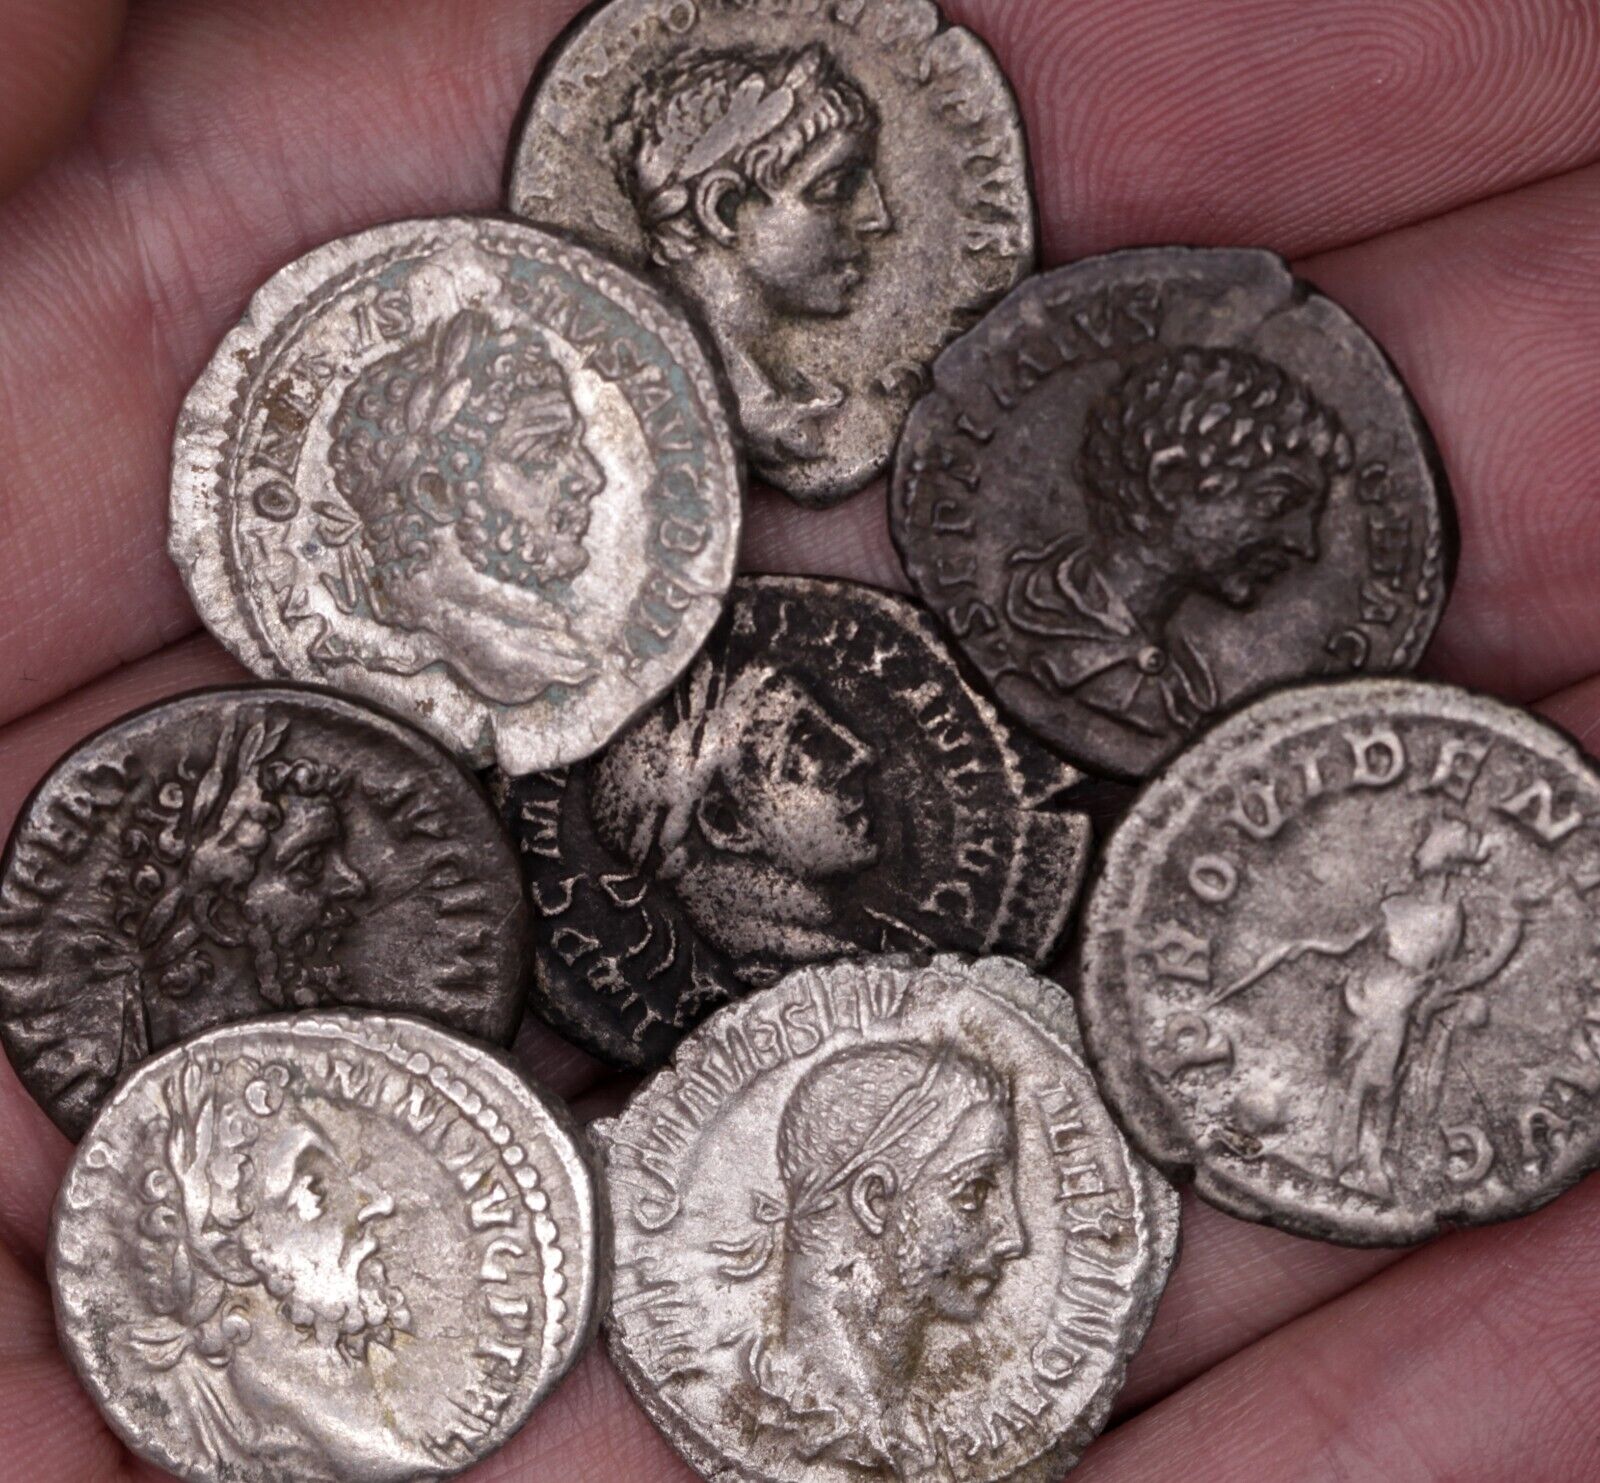 How To Tell The Difference Between Real And Fake Silver | American Bullion